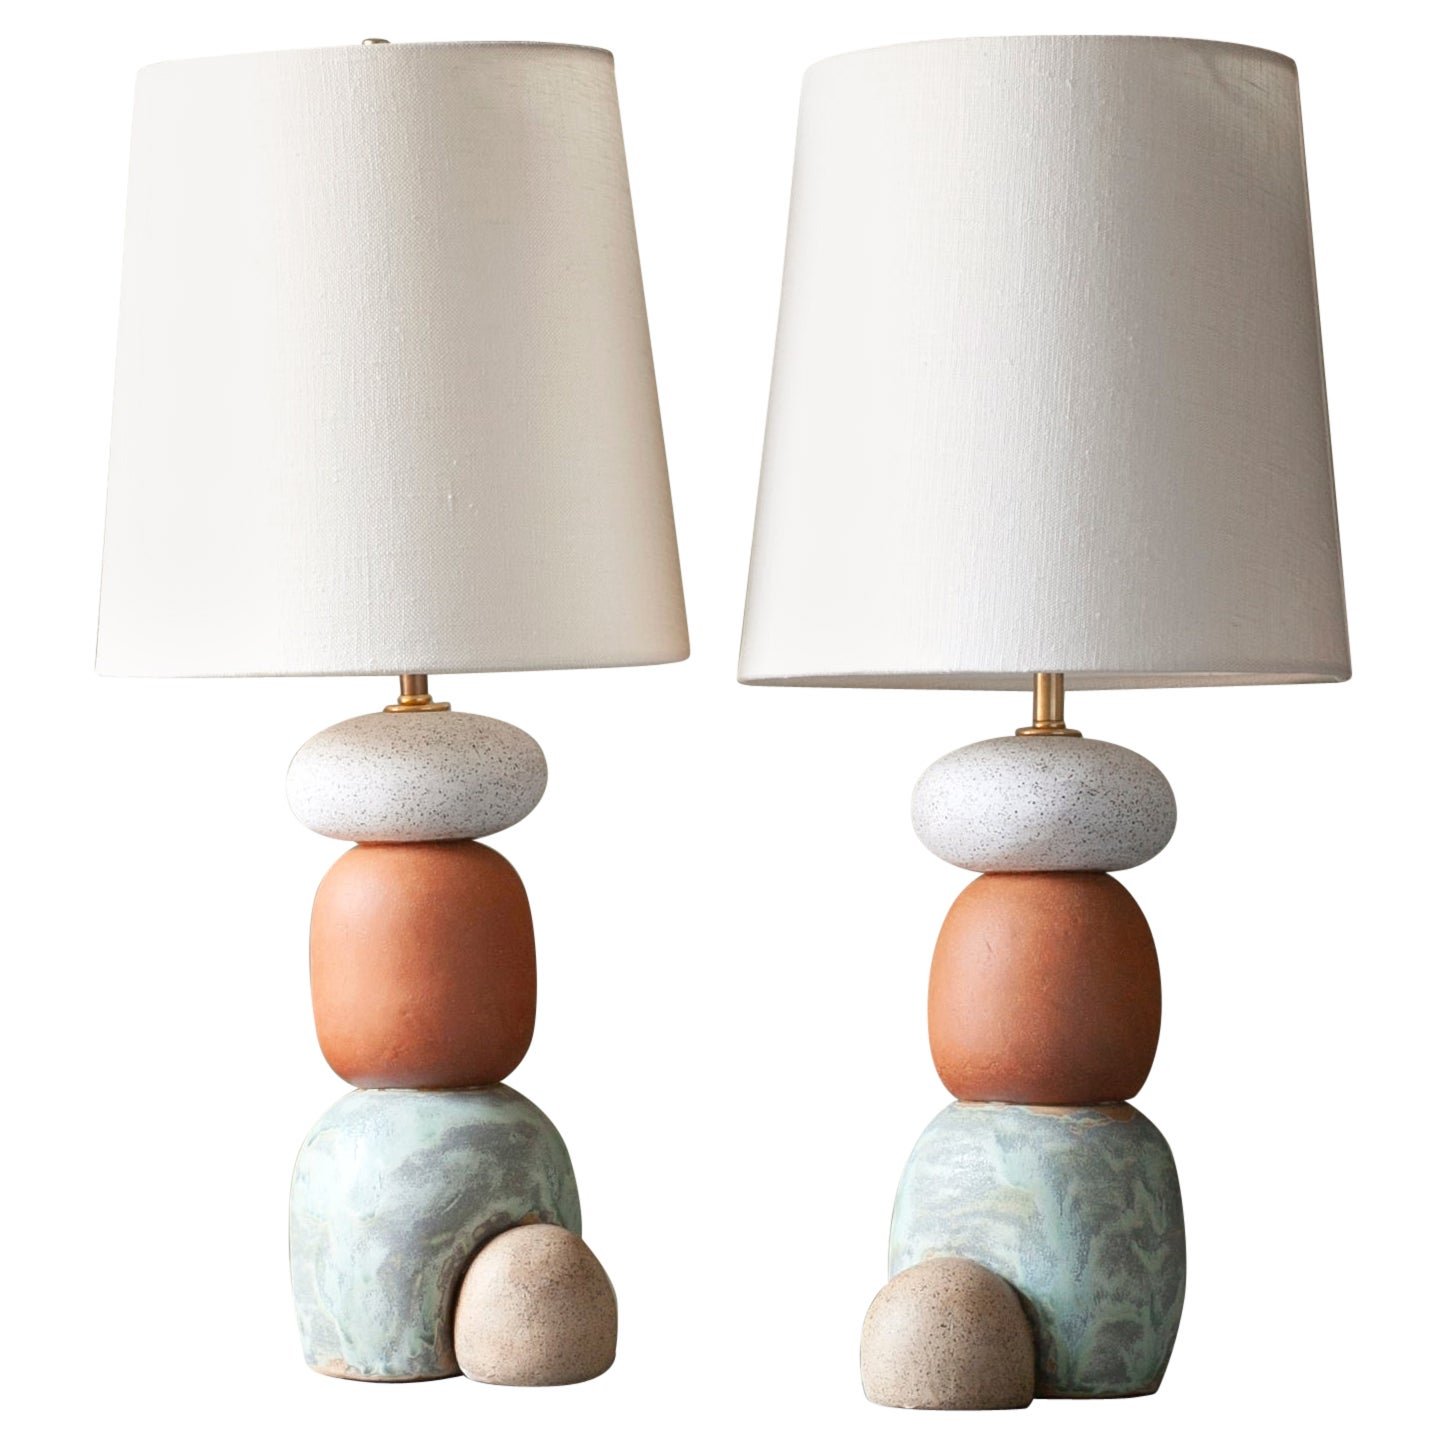 West Lamp Pair, Contemporary Handmade Ceramic Glazed, White, Green, Red Clay